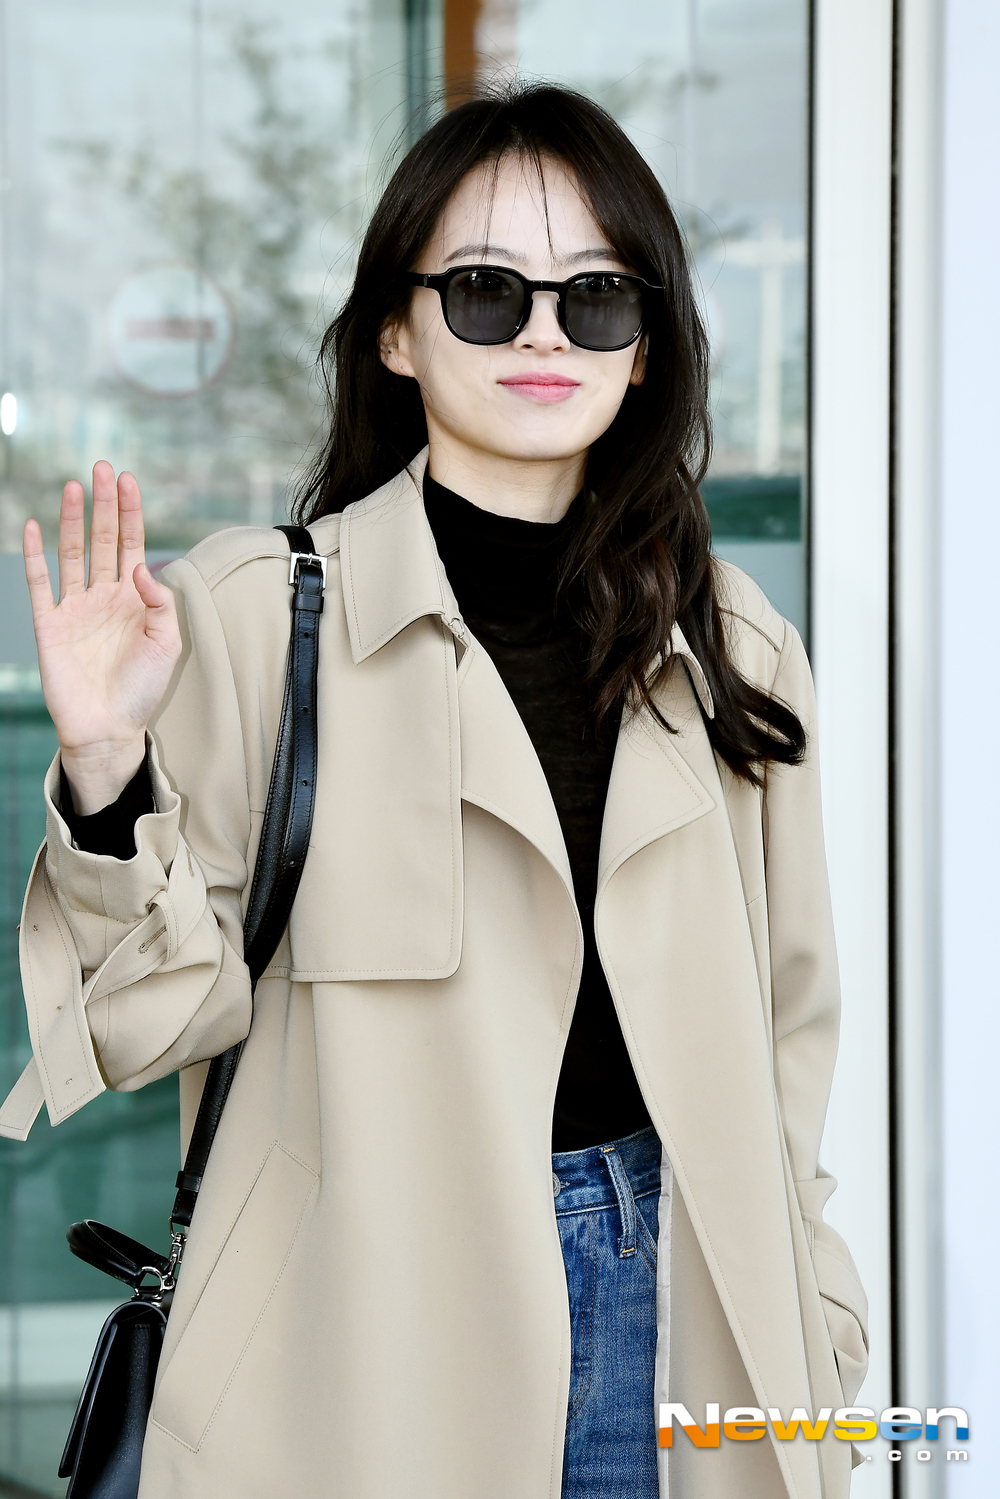 Actor Chun Woo-Hee left for Germany Berlin on the afternoon of February 12 to attend the 69th Berlin International Film Festival (2019) through the Incheon International Airport in Unseo-dong, Jung-gu, Incheon.Actor Chun Woo-Hee is leaving for Germany Berlin with an airport fashion.exponential earthquake